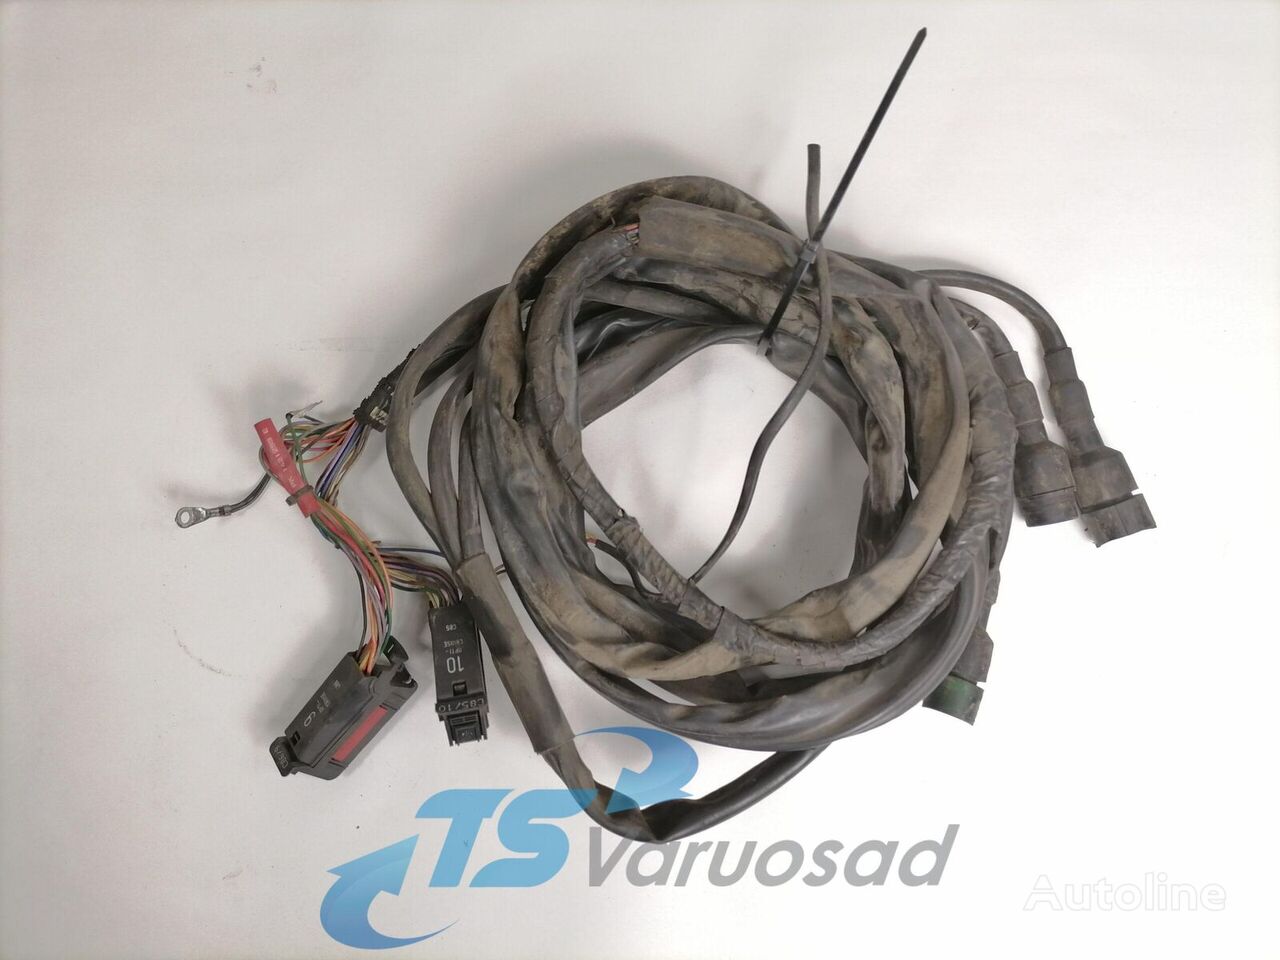 Scania gearbox cable 1421299 wiring for Scania 124 truck tractor